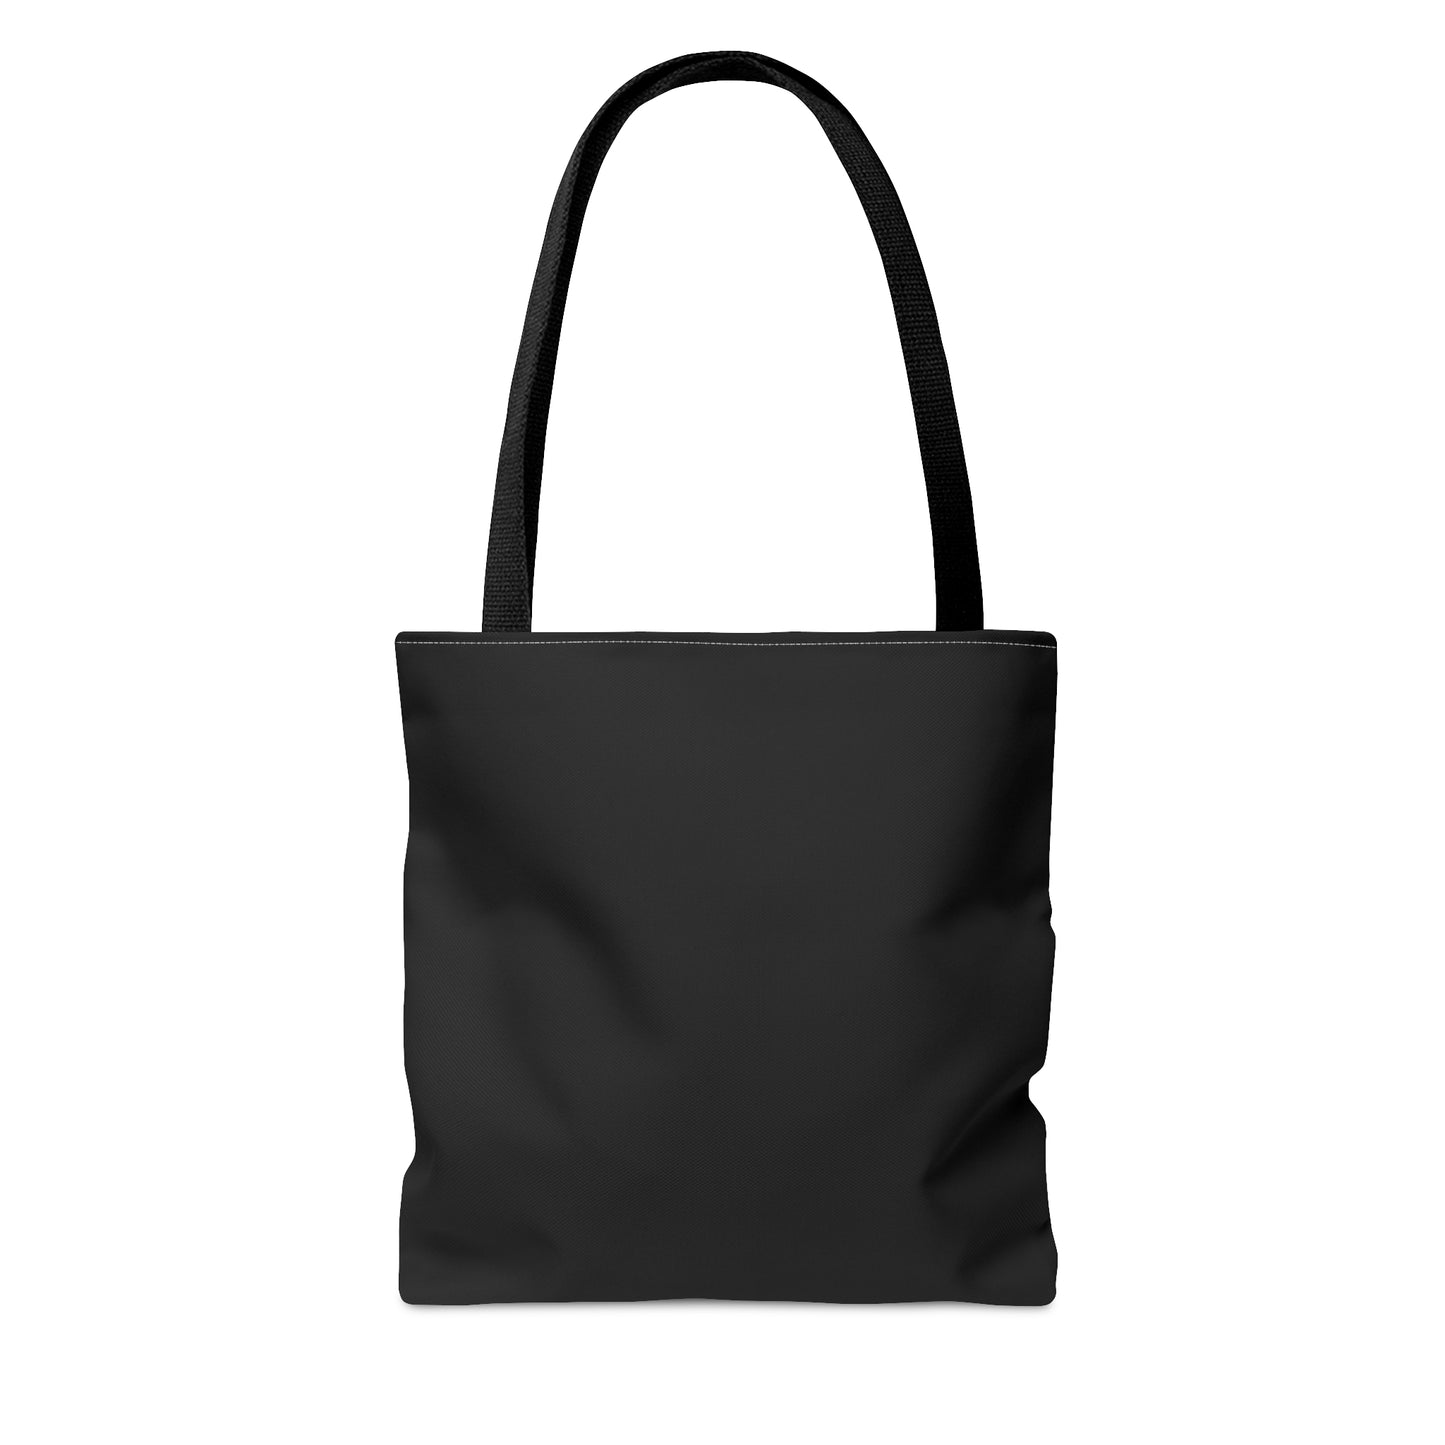 Jesus Died For You In Public So Don't Only Live For Him In Private Christian Tote Bag Printify